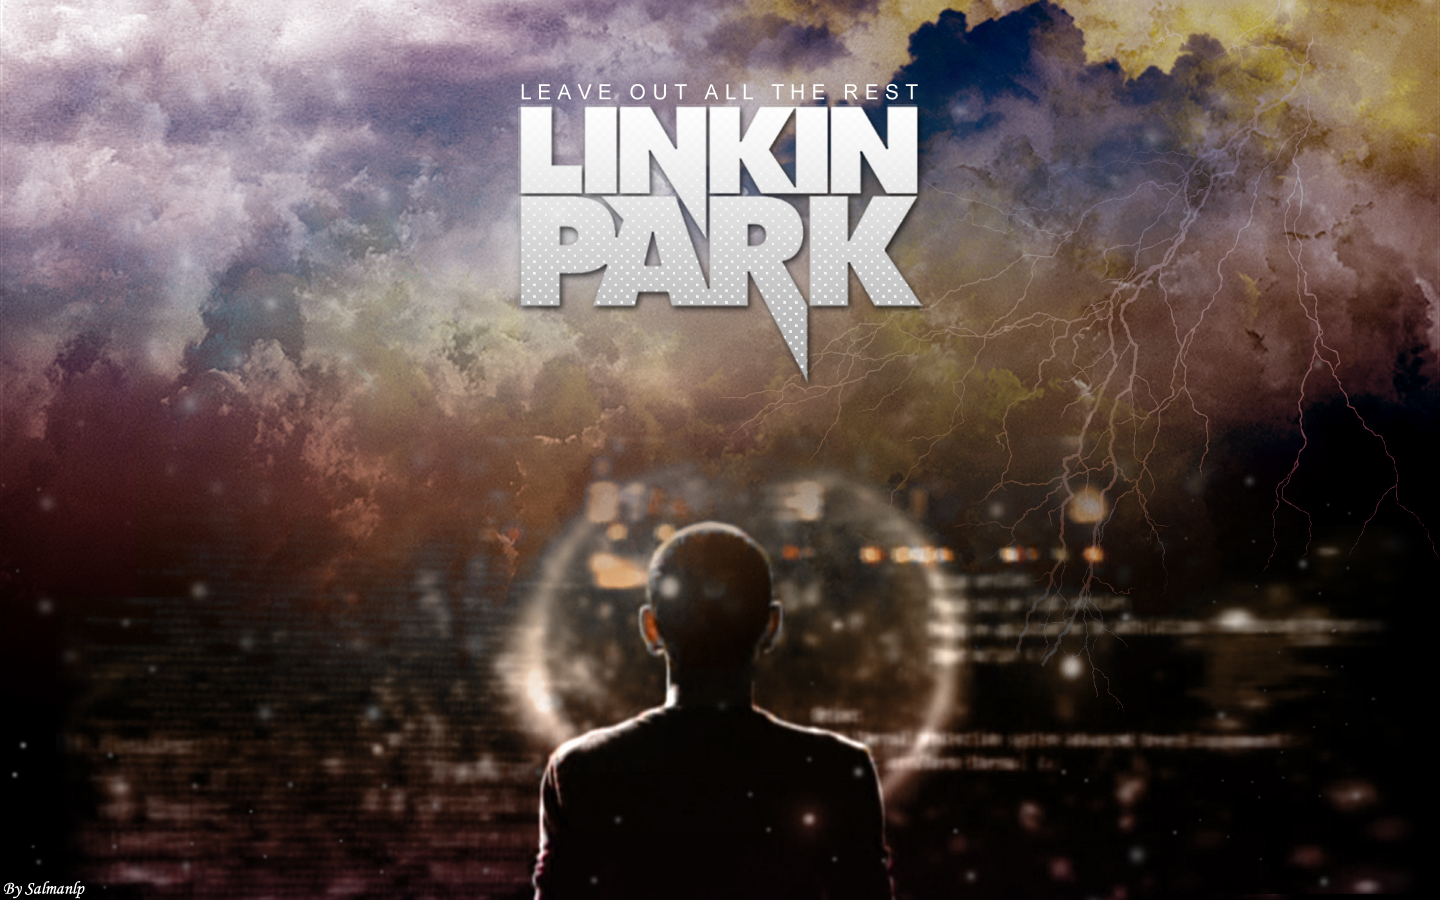 Hd Wallpapers Linkin Park Leave Out All The Rest - Linkin Park Leave Out Album - HD Wallpaper 